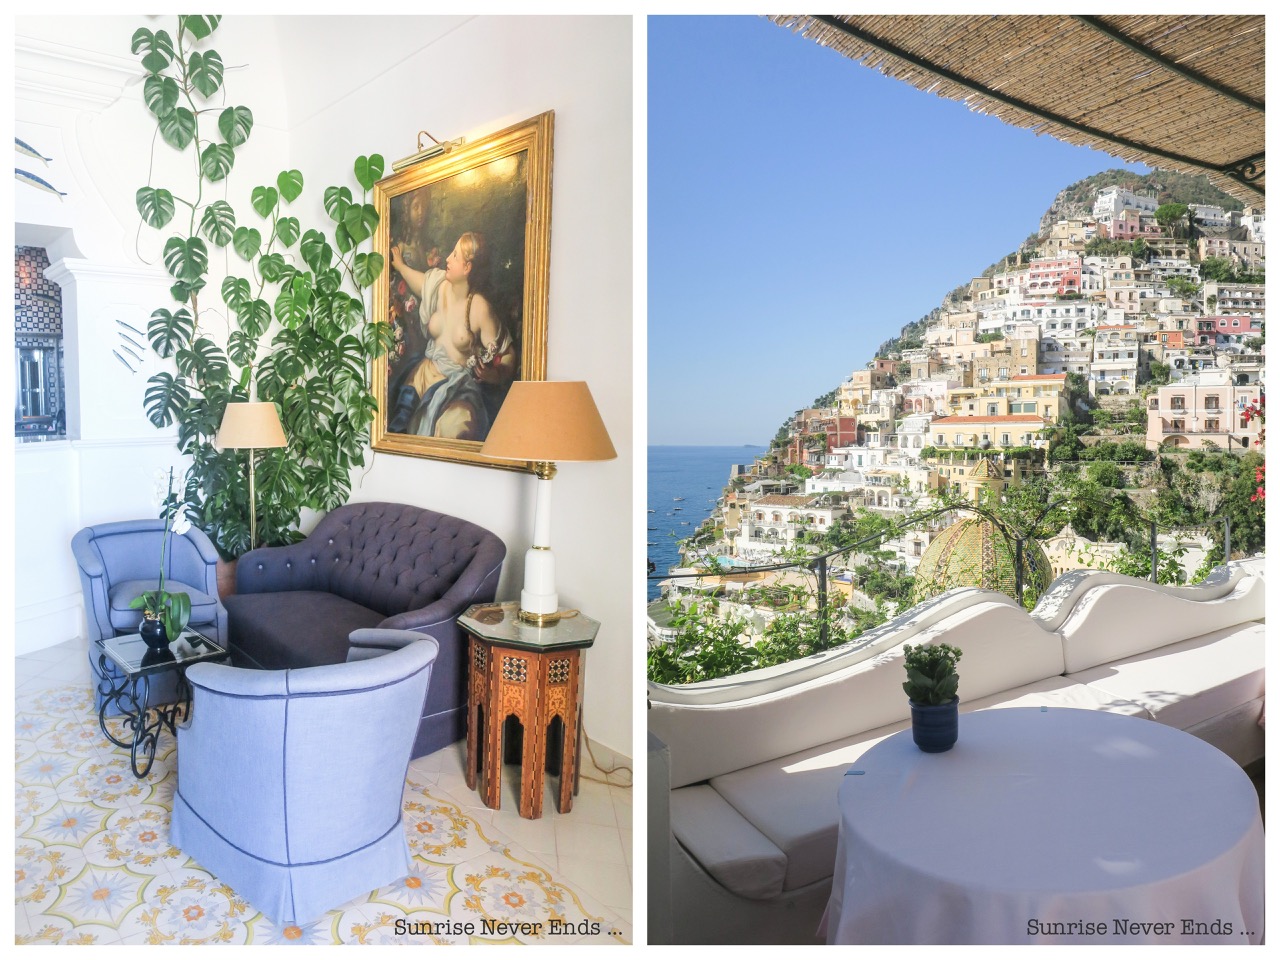 positano,italie,cote amalfitaine,voyage,travel,travel blogger,hotel,luxury hotel,hotel blogger,le sirénuse,breakfast,bon plan,tips,travel guide,palace,alice et fantomette ont the boat,anitalianboattrip